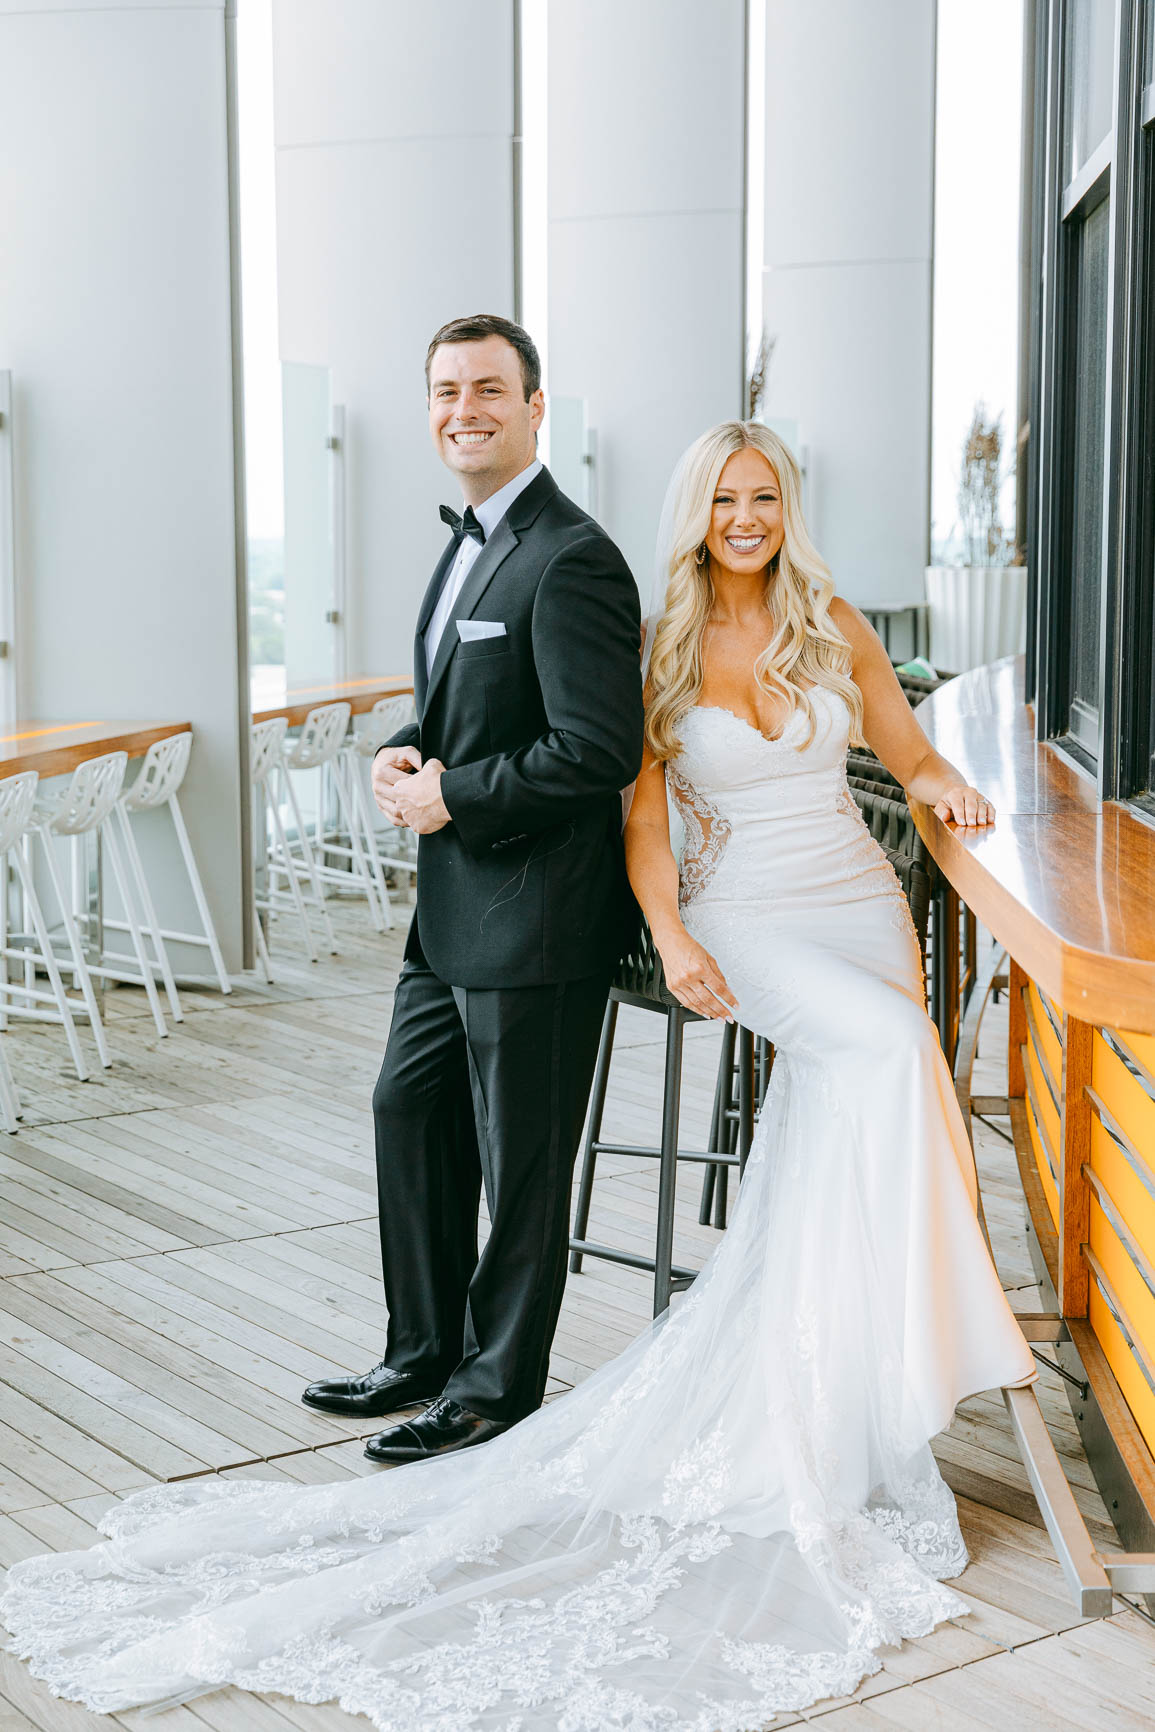 Bride and groom photos at merchant & trade rooftop in Charlotte nc shot by Nhieu Tang Photography | nhieutang.com